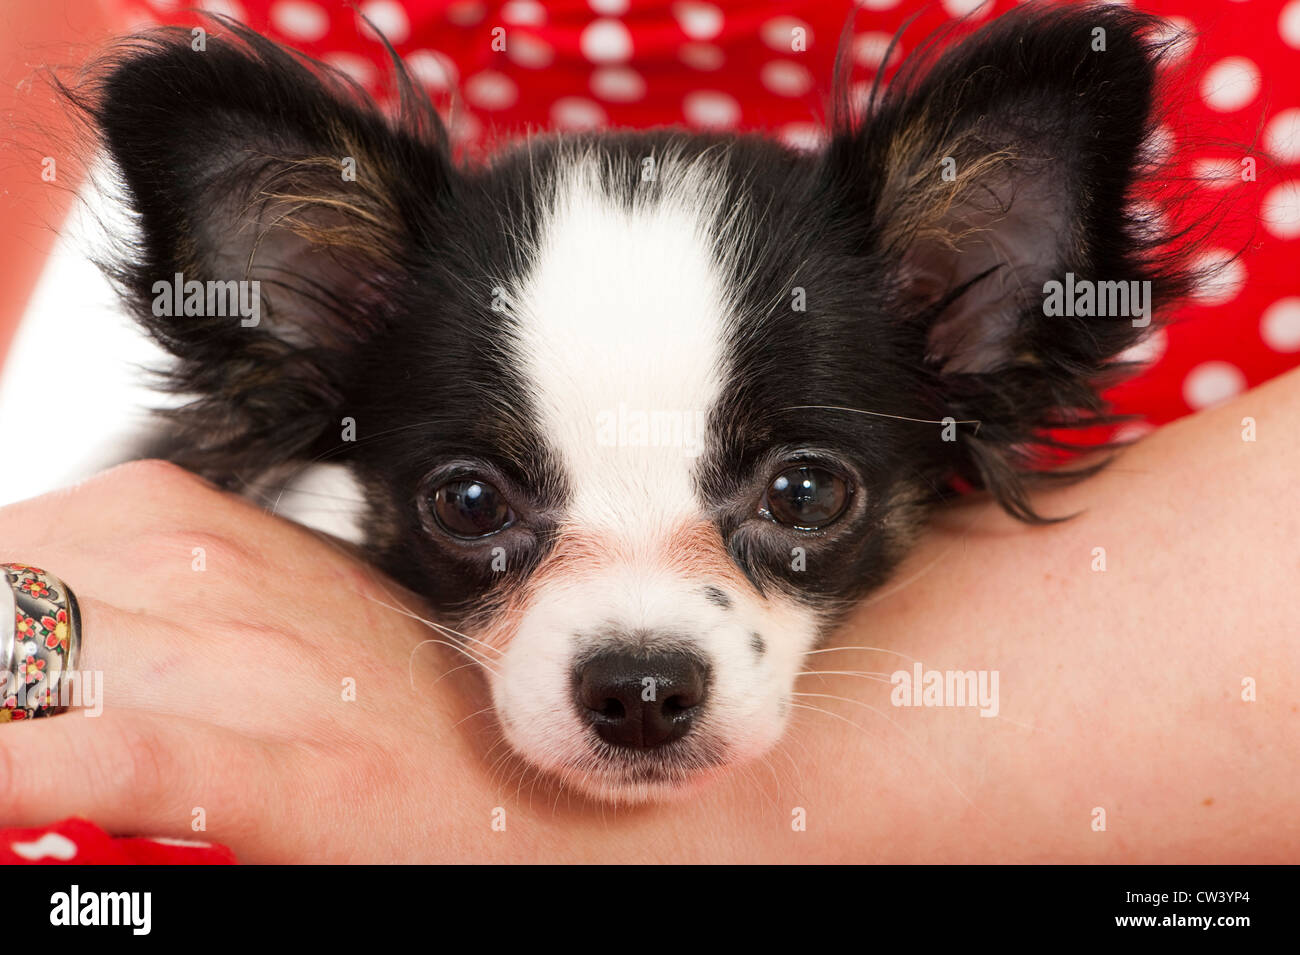 Chihuahua. Black-and-white dog in the arms of its owner Stock Photo